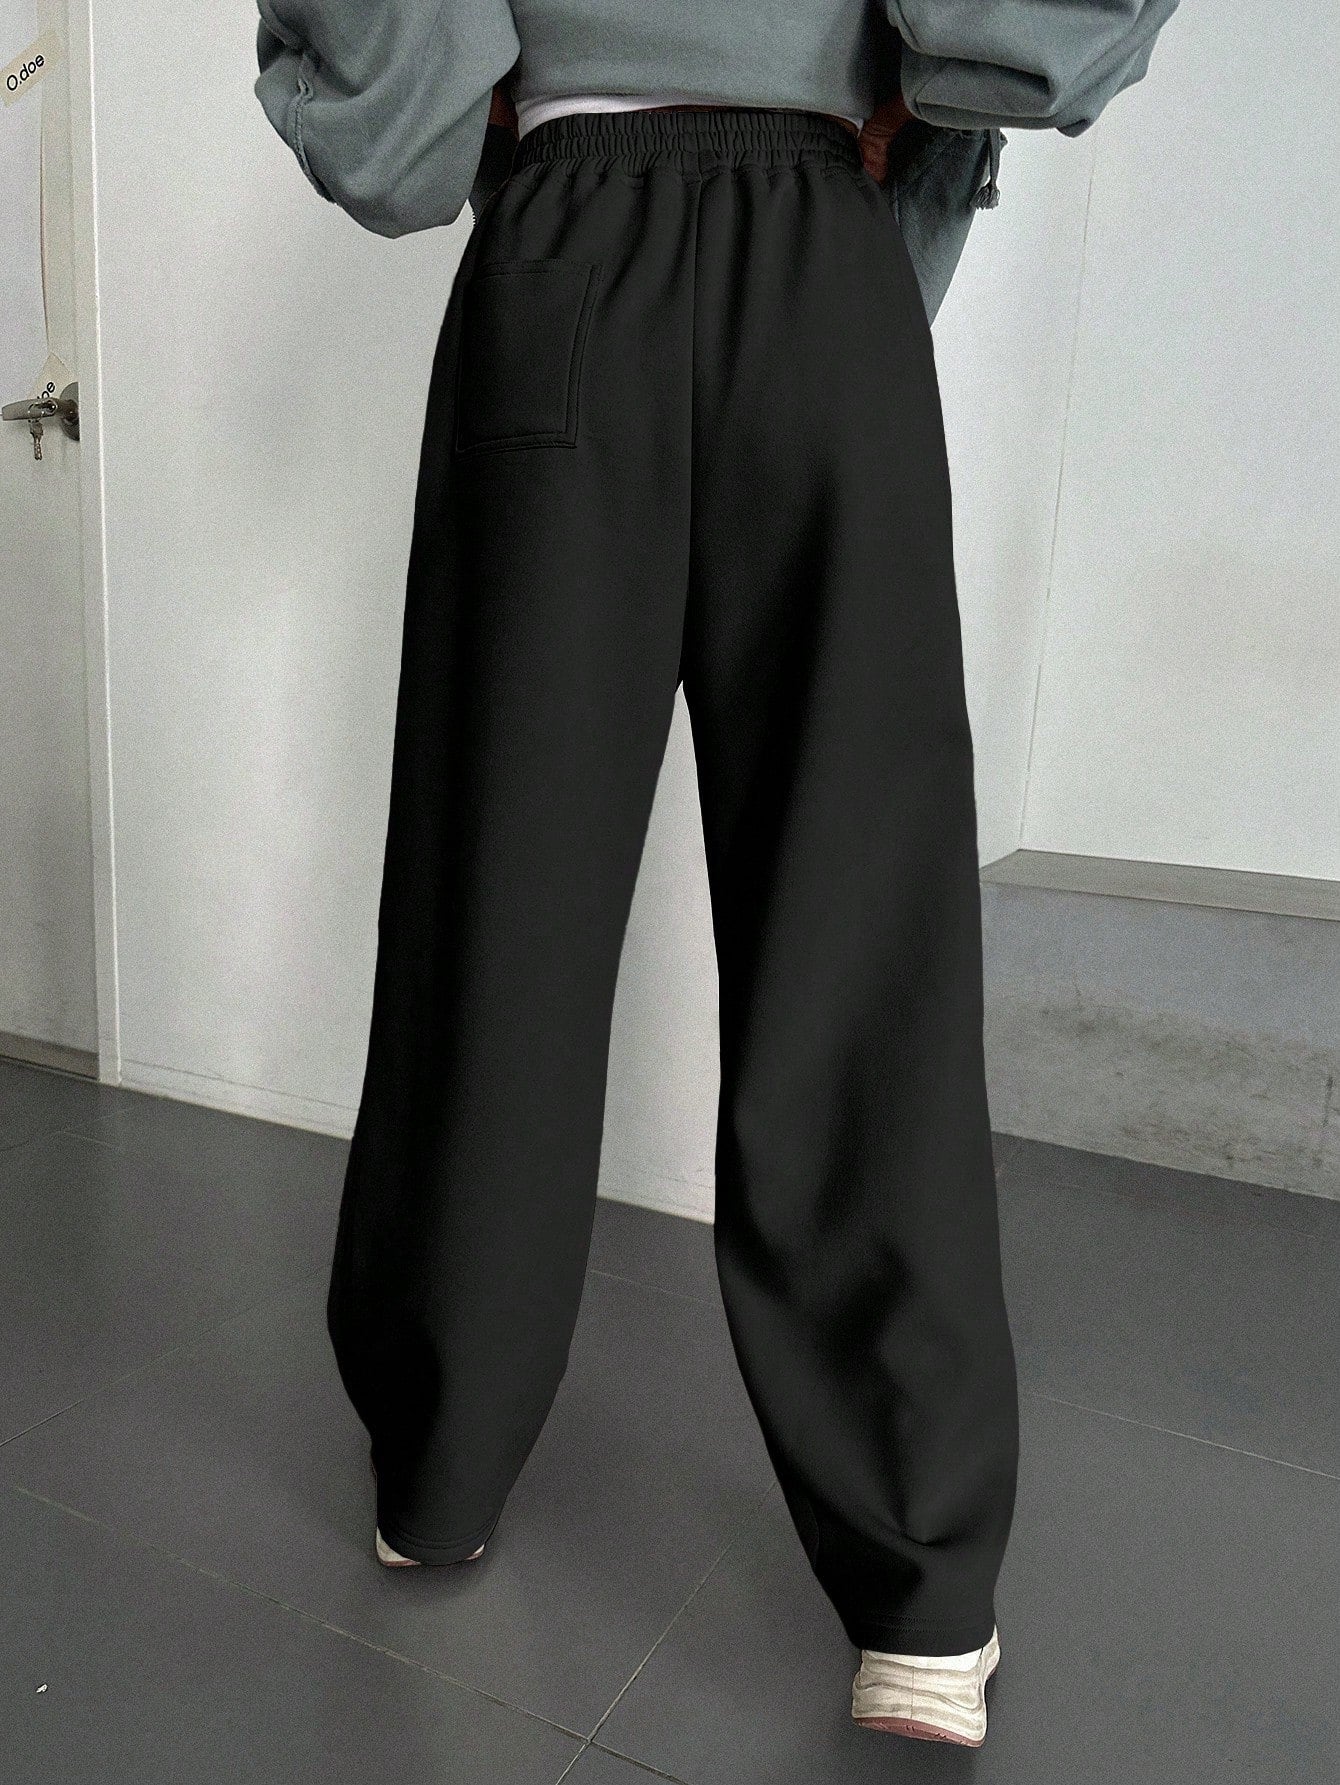 Women's Casual Loose Sweatpants With Pockets